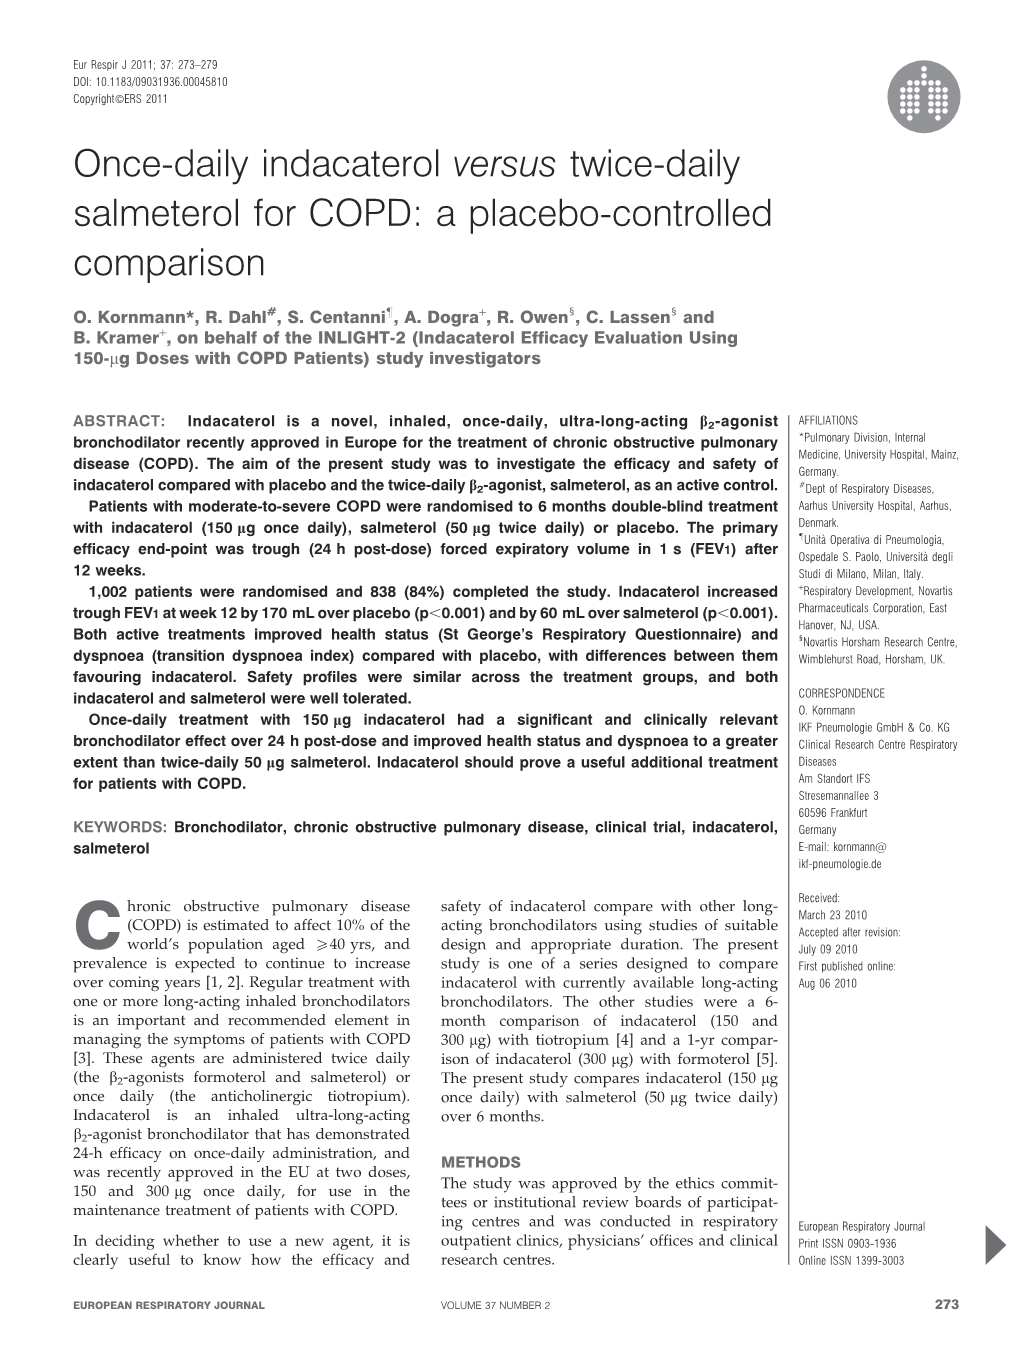 Once-Daily Indacaterol Versus Twice-Daily Salmeterol for COPD: a Placebo-Controlled Comparison